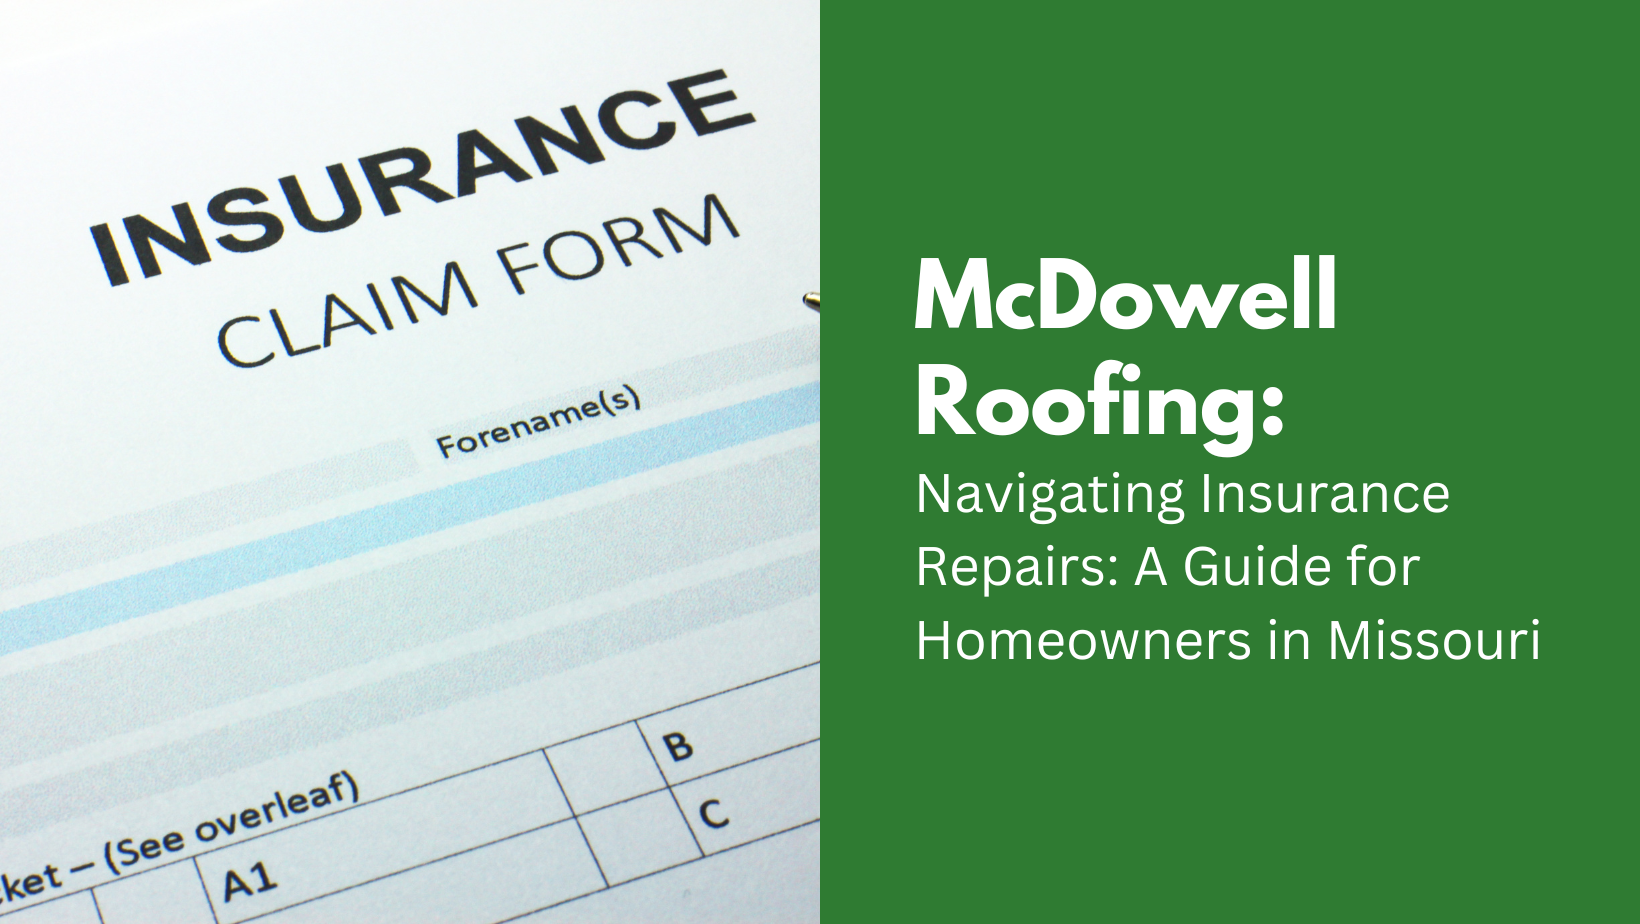 Navigating Insurance Repairs: A Guide for Homeowners in Missouri